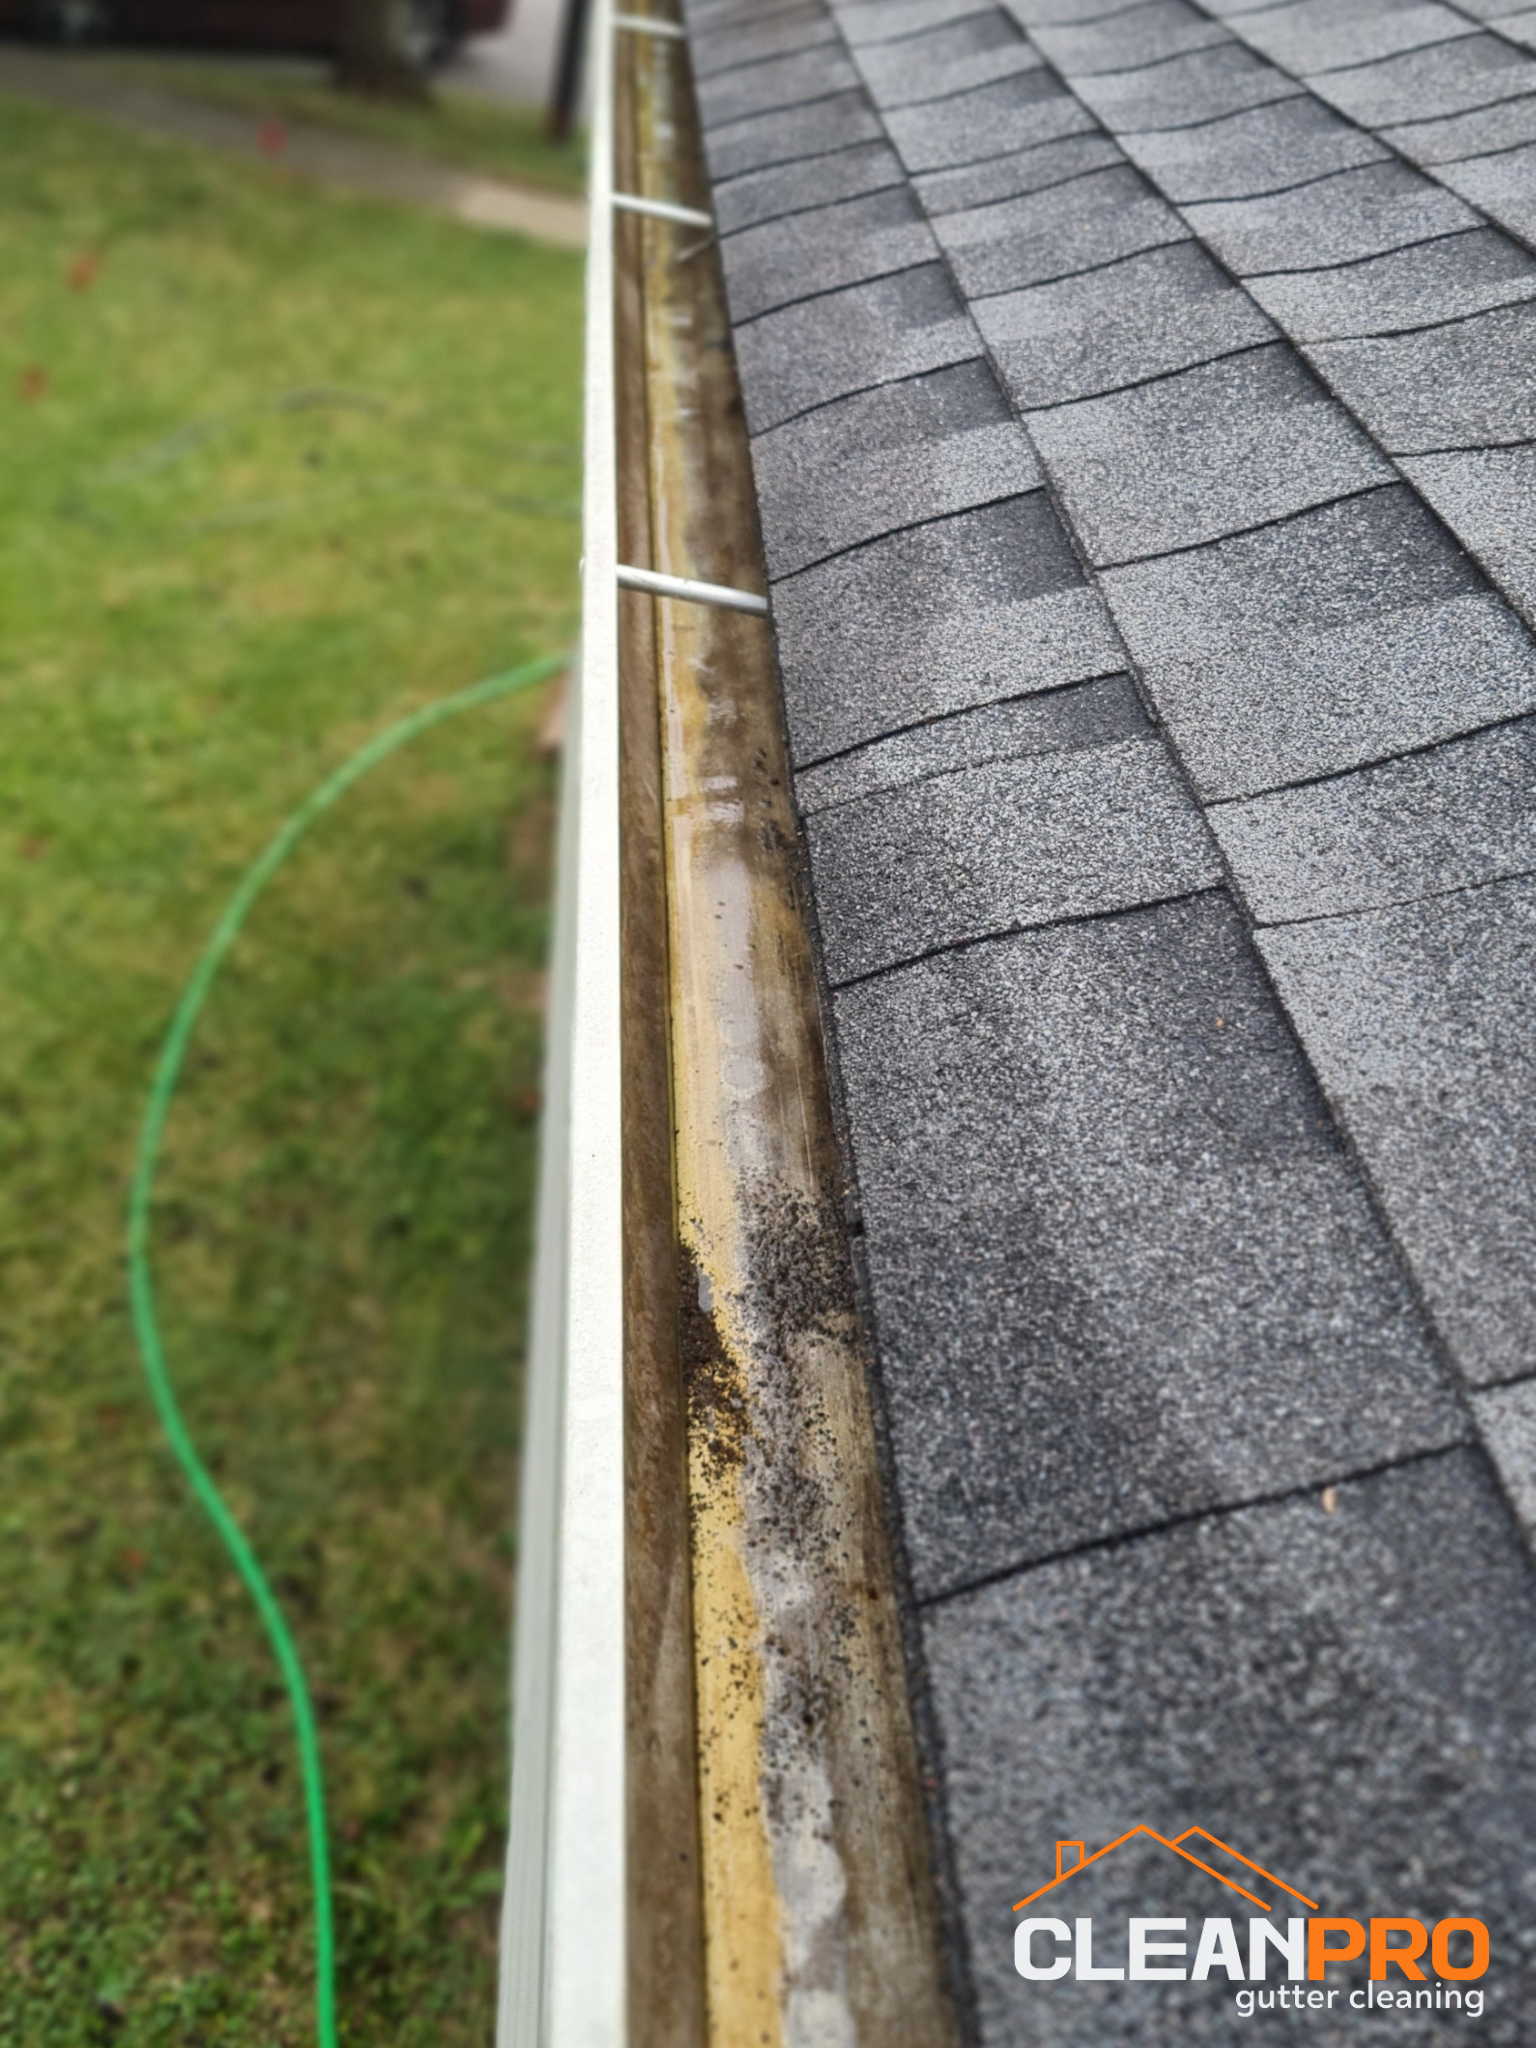 Quality Gutter Cleaning in Knoxville TN